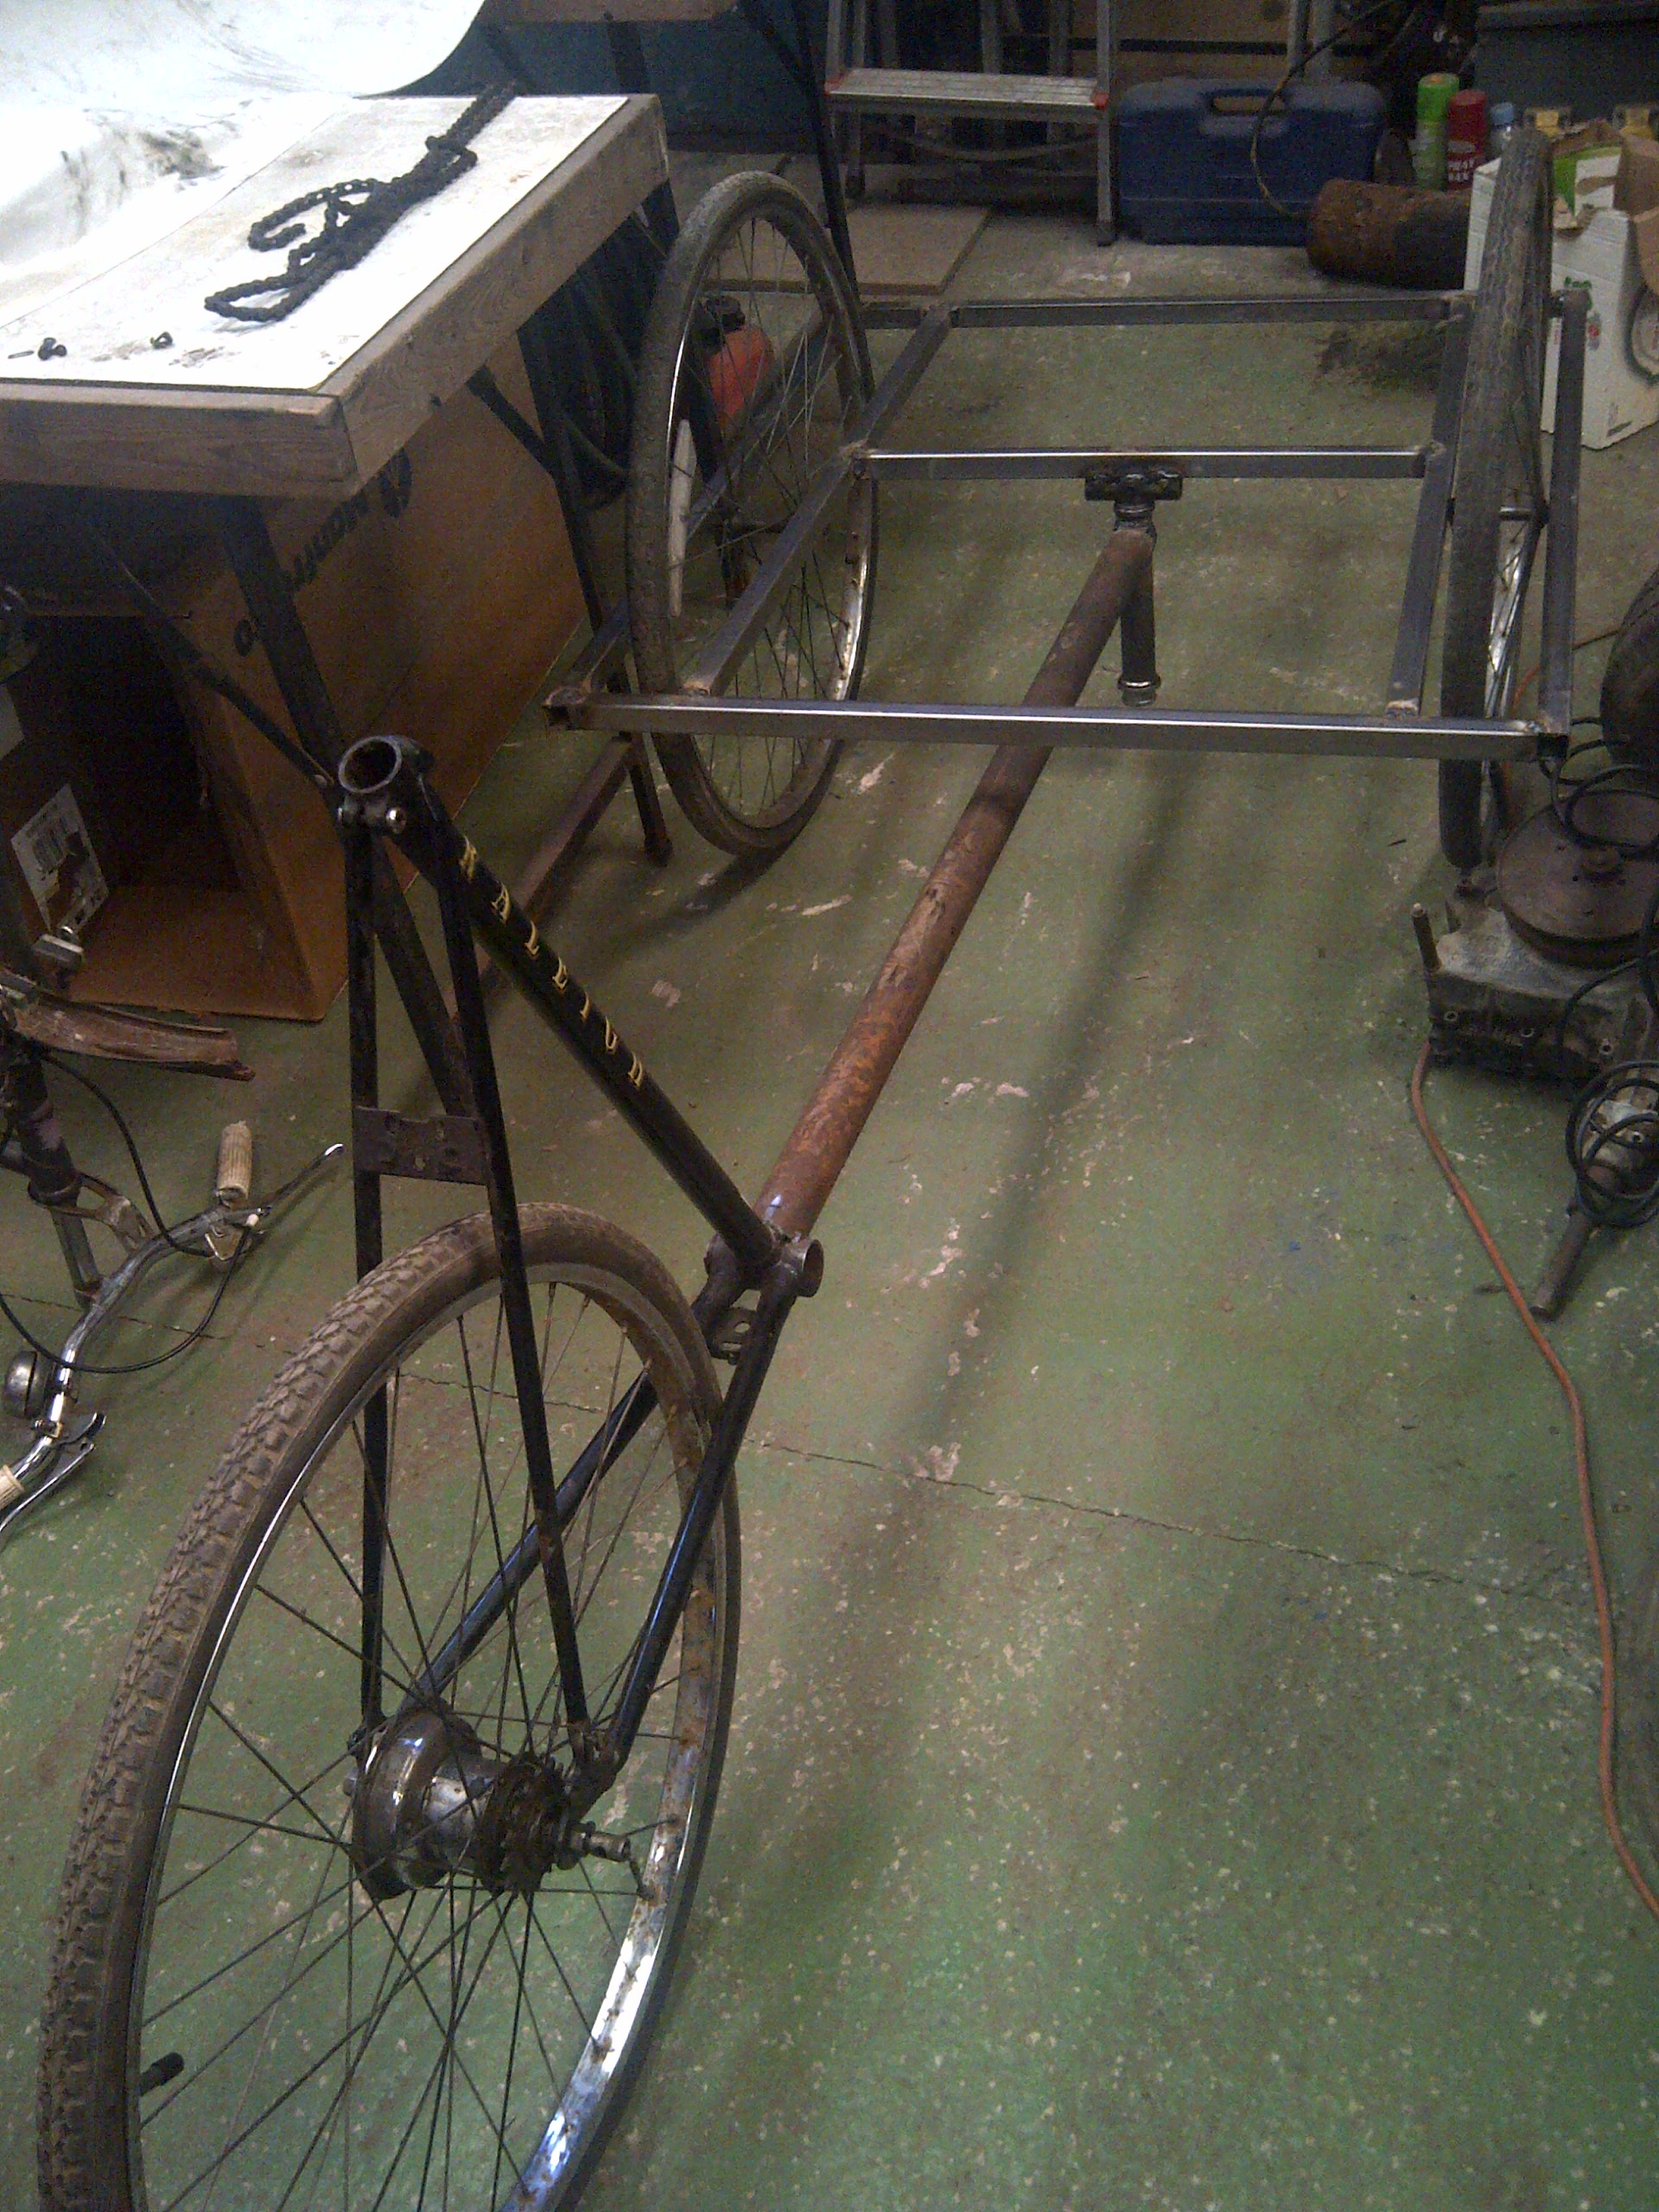 The cargo trike beginning to take shape. The rusty looking main tube I found and attached to the back ebd of the original bike can be seen, as can the upside down head tube forming the pivot. The wheels had just been rested in place for the photo at this stage.